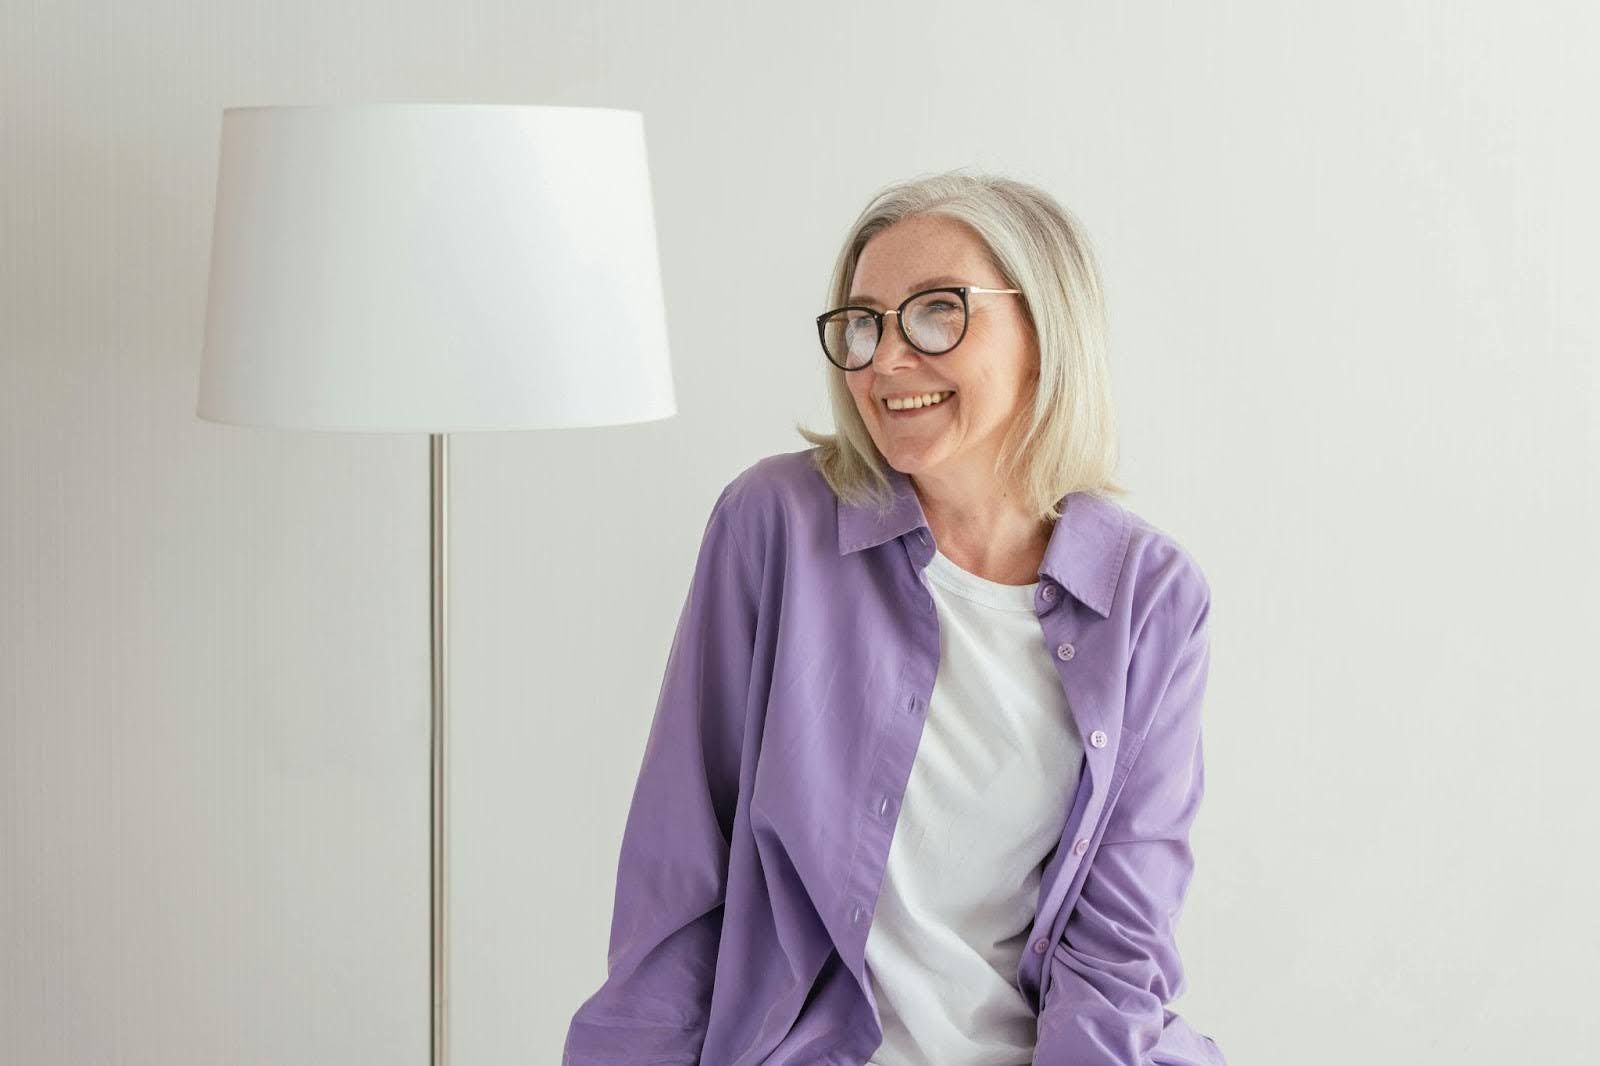 A woman wearing glasses and a purple shirt is sitting next to a lamp .